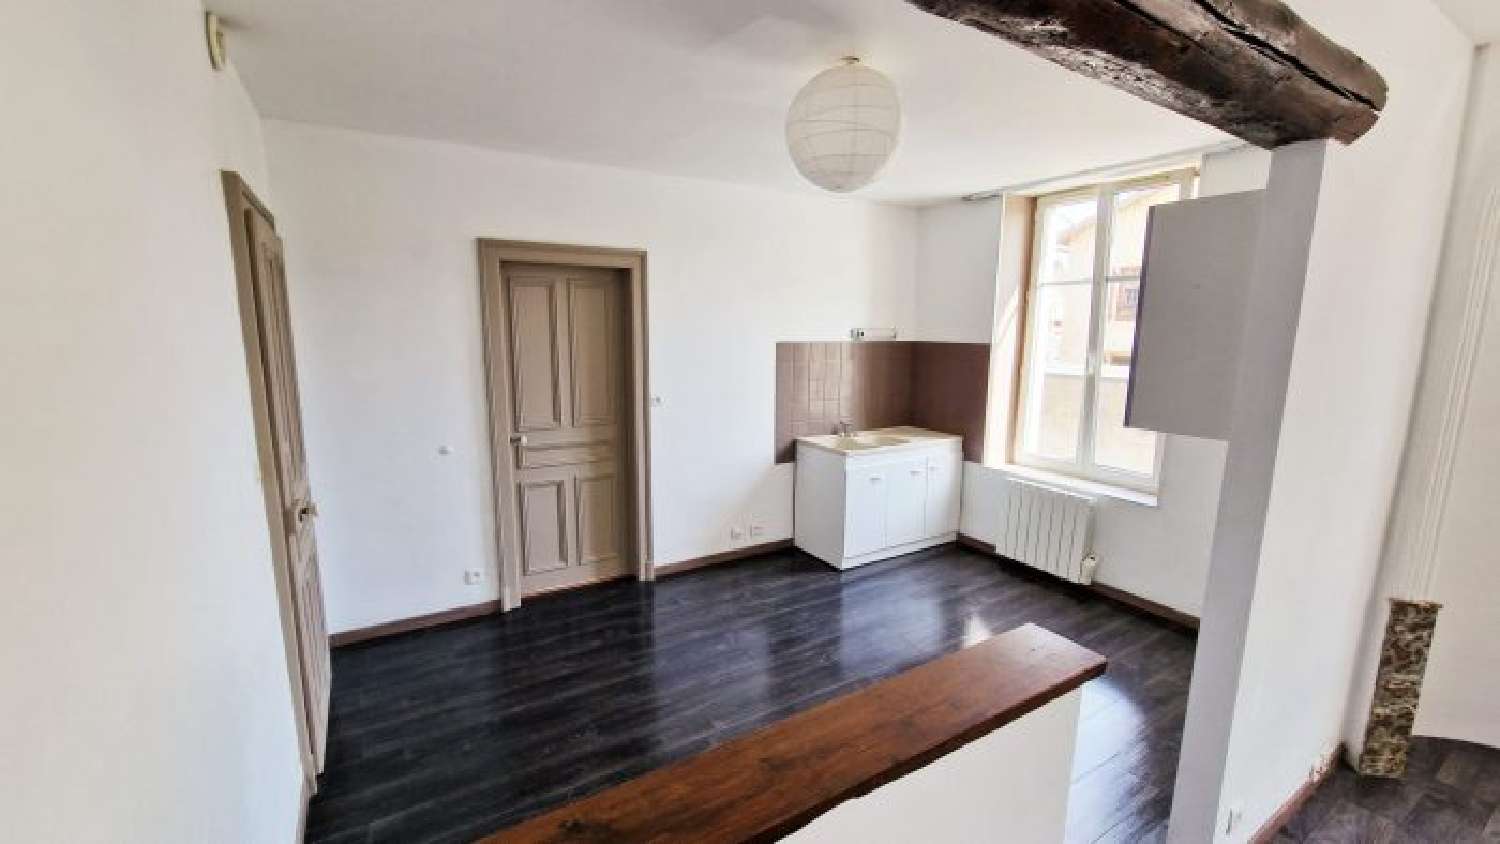  kaufen Wohnung/ Apartment Pagny-sur-Moselle Meurthe-et-Moselle 3